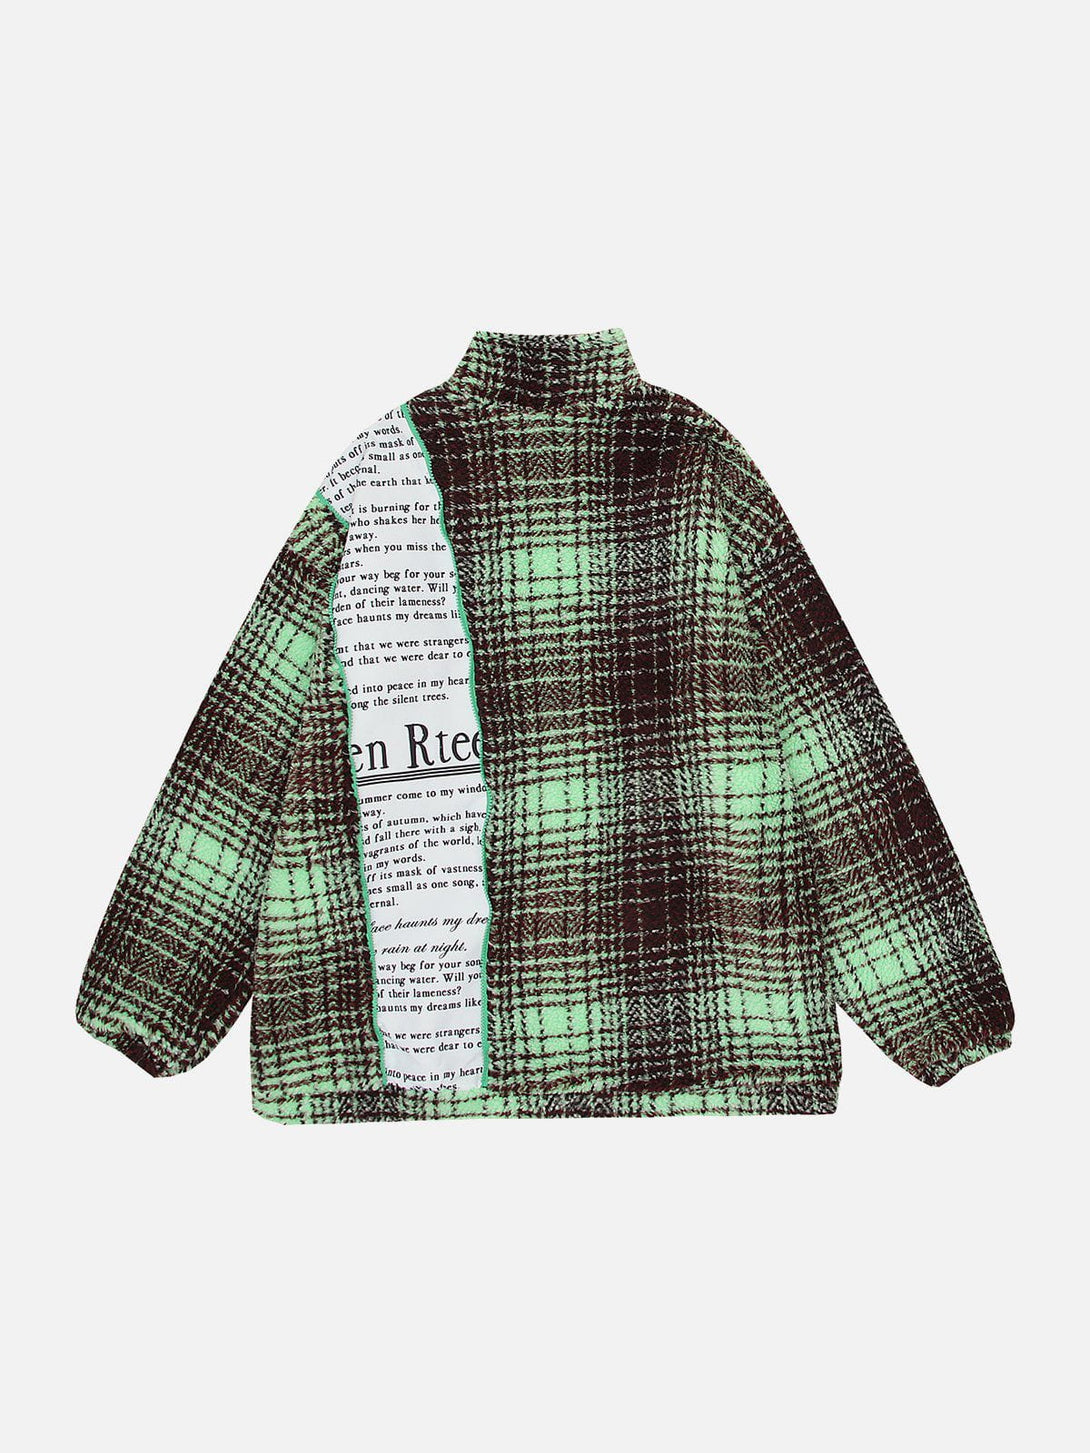 Majesda® - Retro Patchwork Plaid Stand Collar Sherpa Coat outfit ideas streetwear fashion